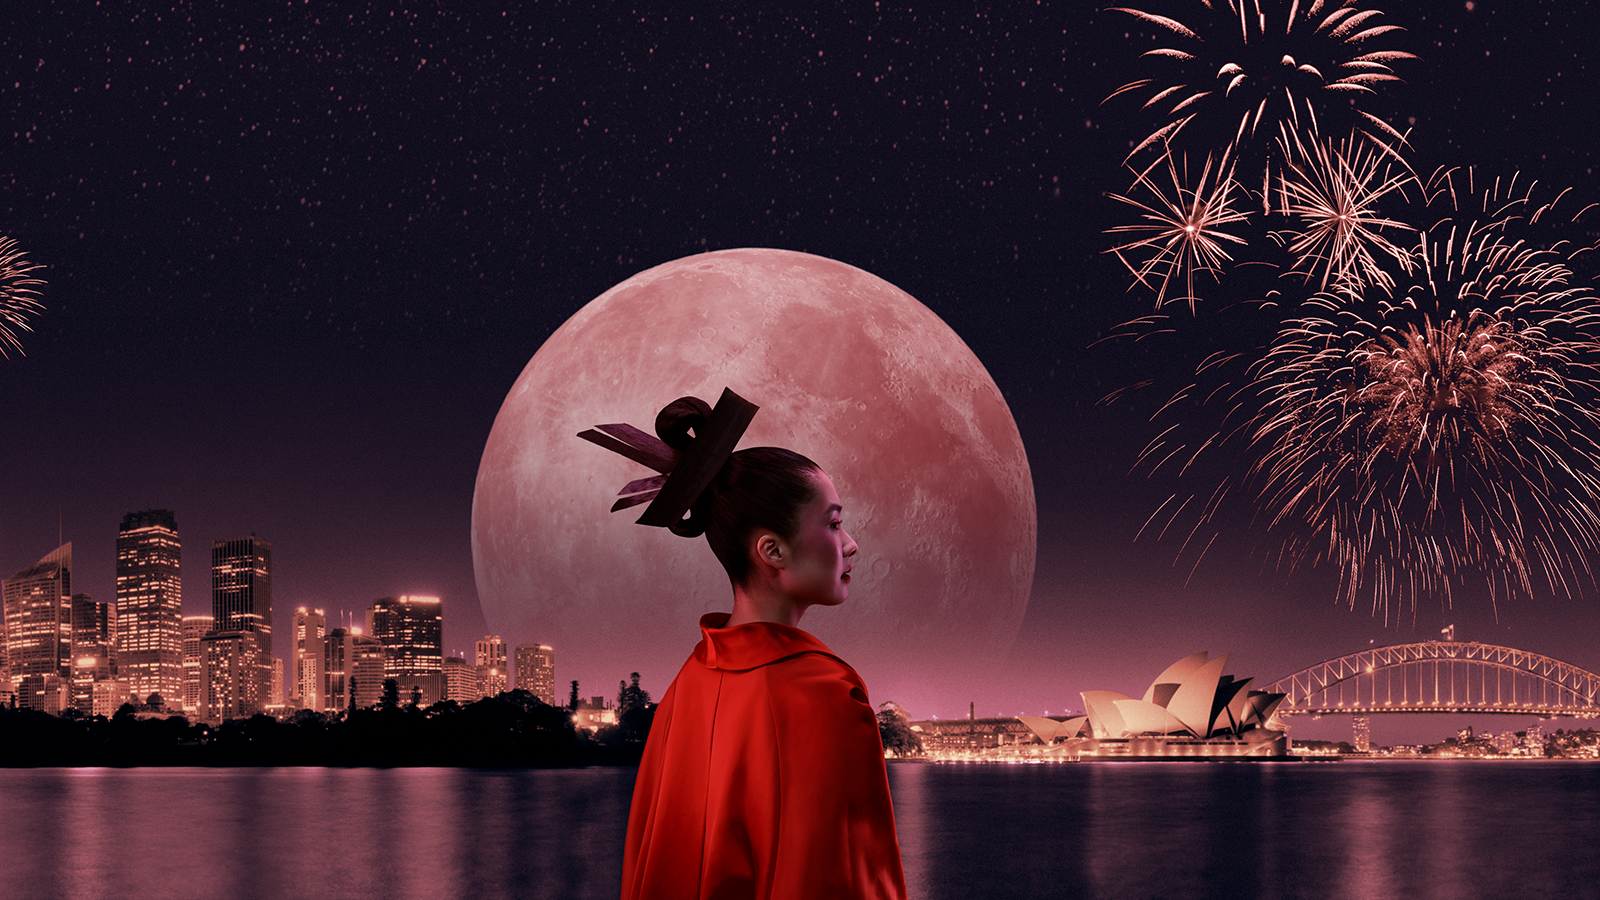 A woman in red dress with fireworks in the background.